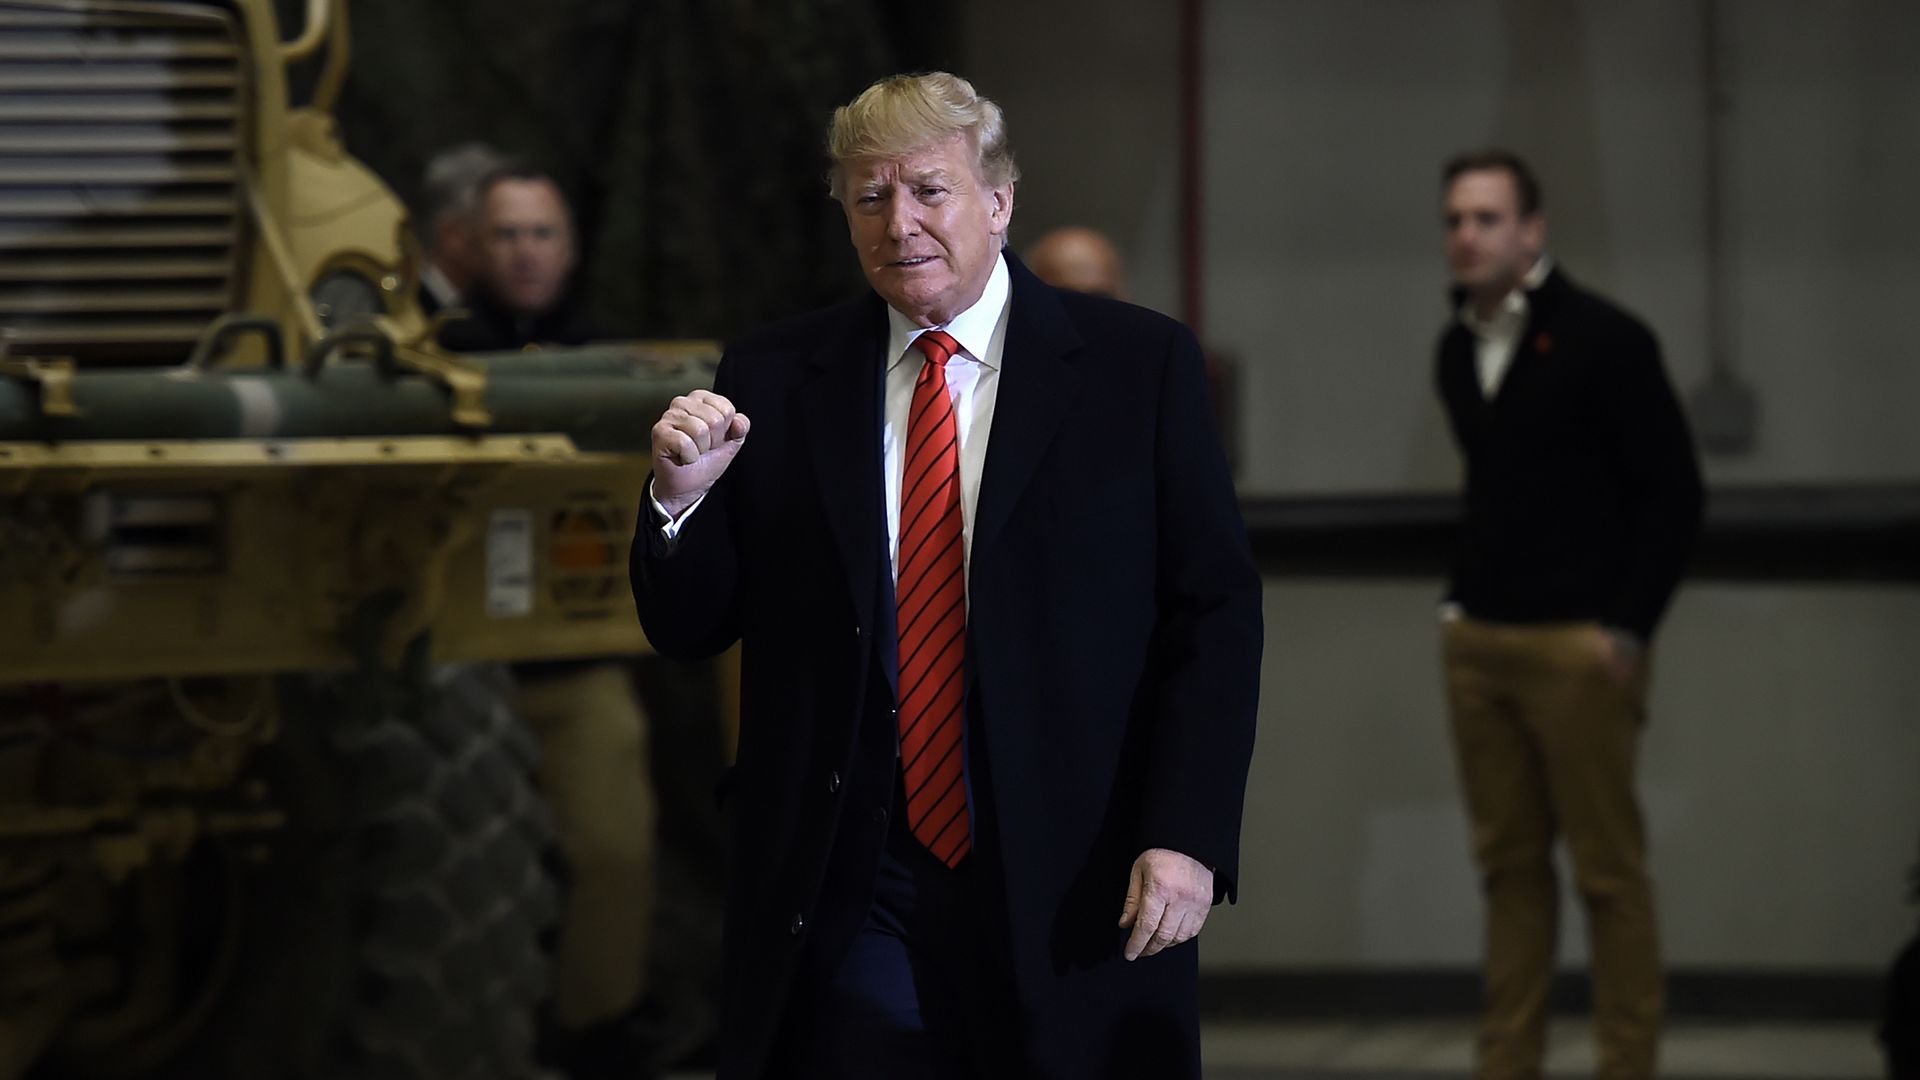 Trump gestures as he arrives to speak to the US soldiers during a surprise Thanksgiving day visit at Bagram Air Field, on November 28, 2019 in Afghanistan. 